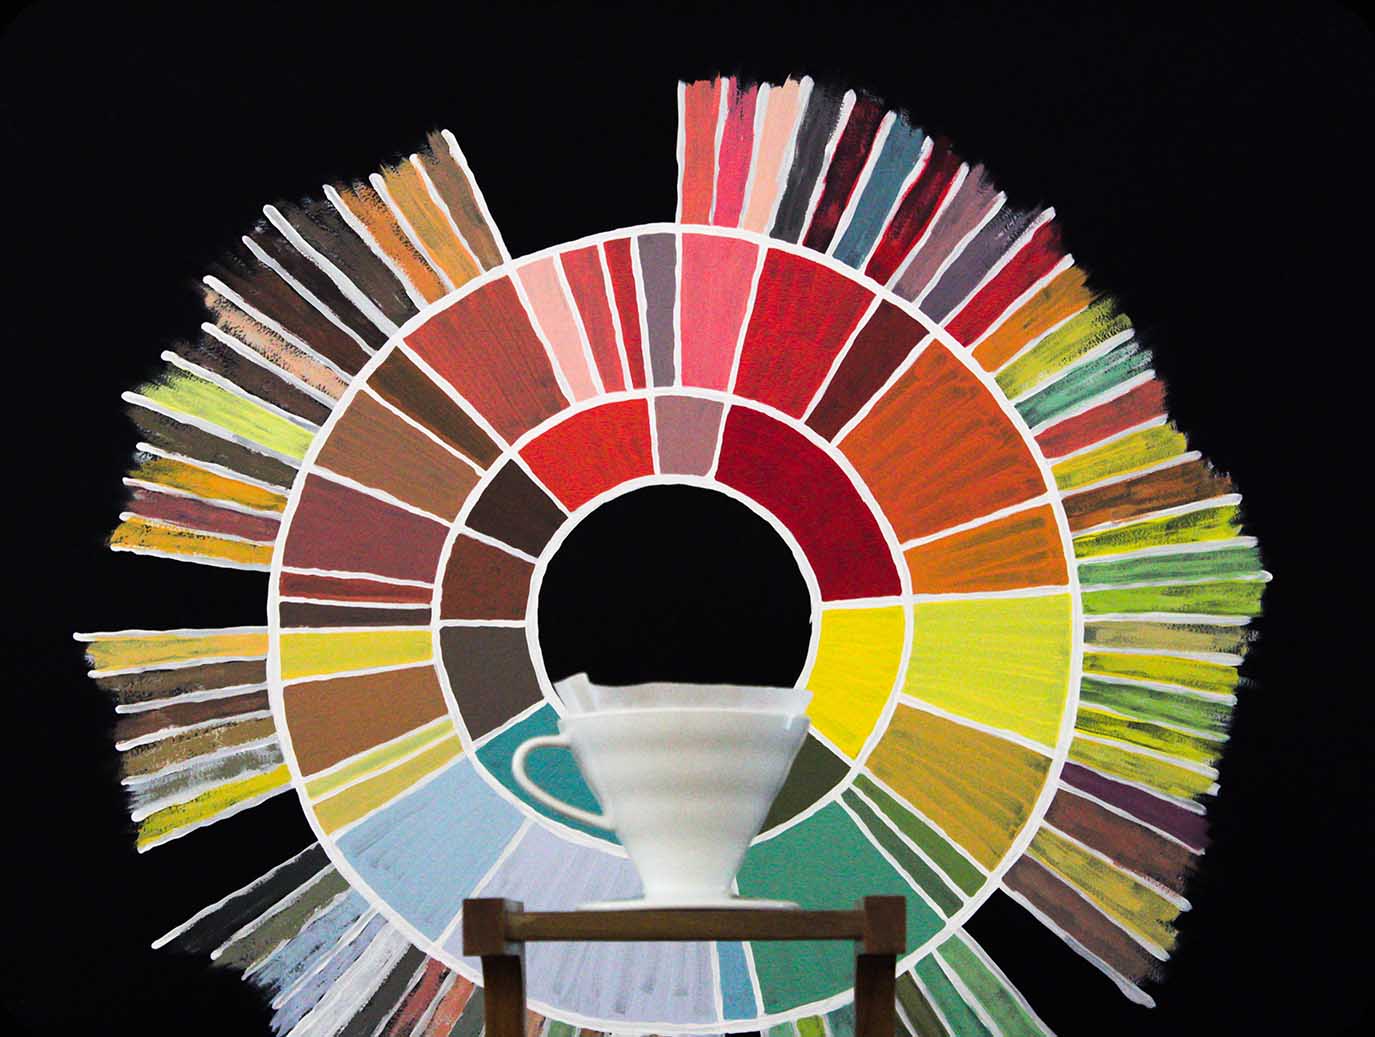 Pour over brewer displays beautifully in front of flavor wheel